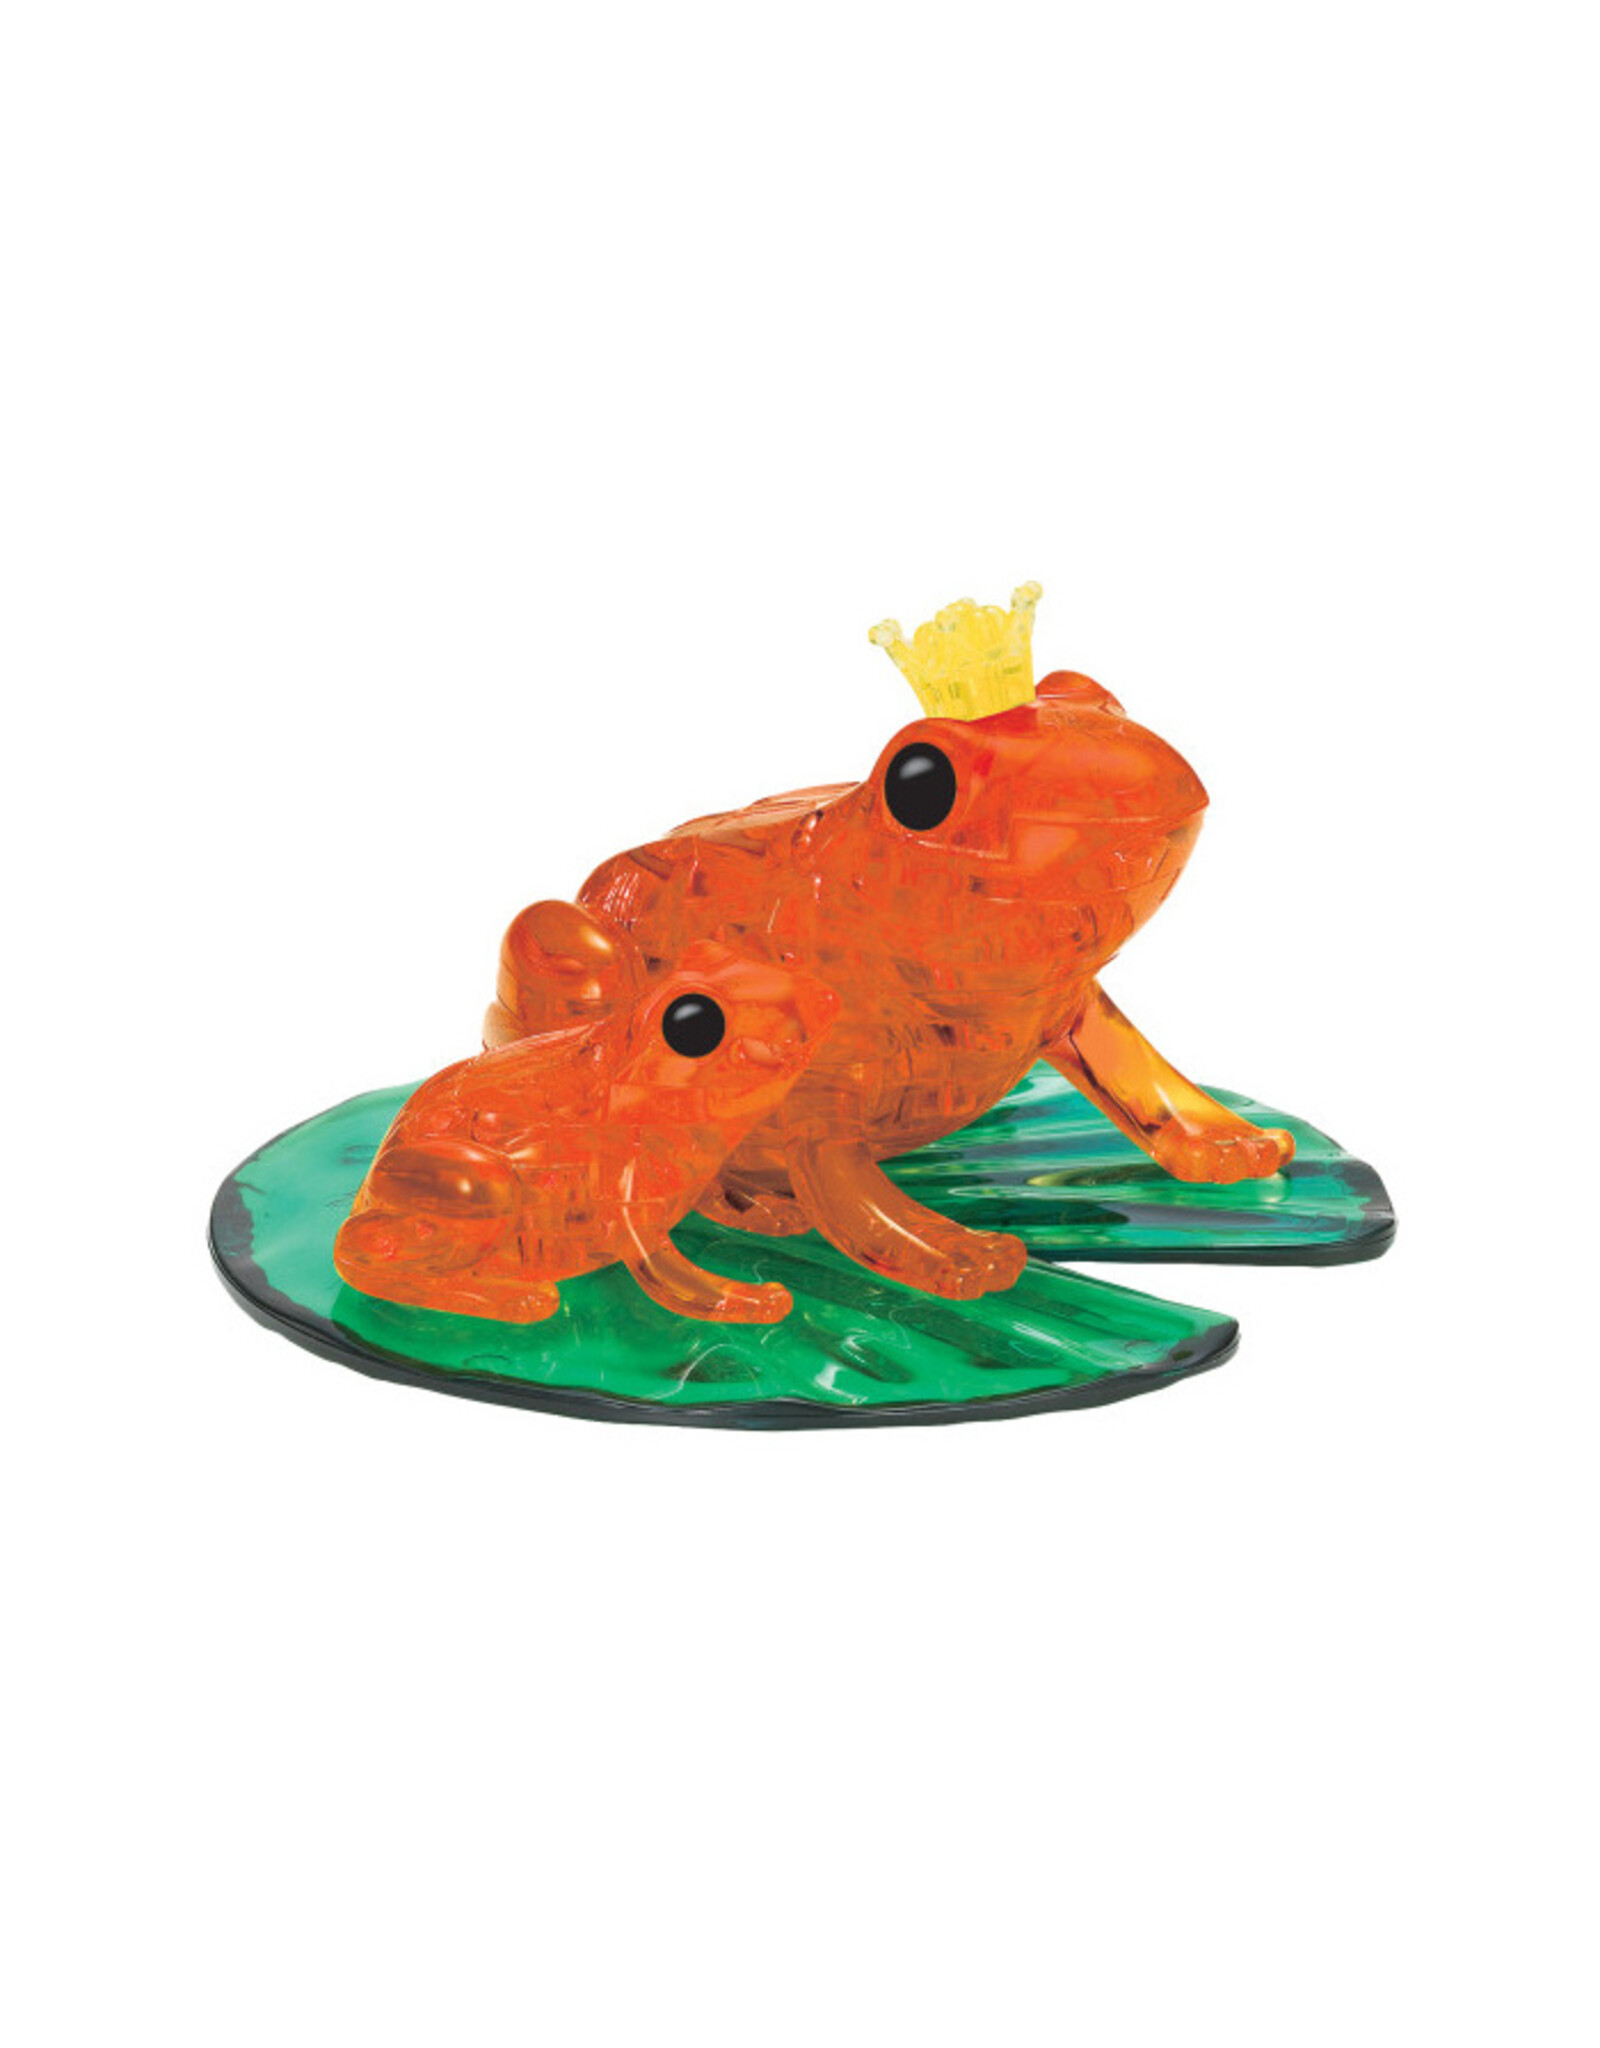 University Games Puzzle: 3D Crystal: Frogs (OR)